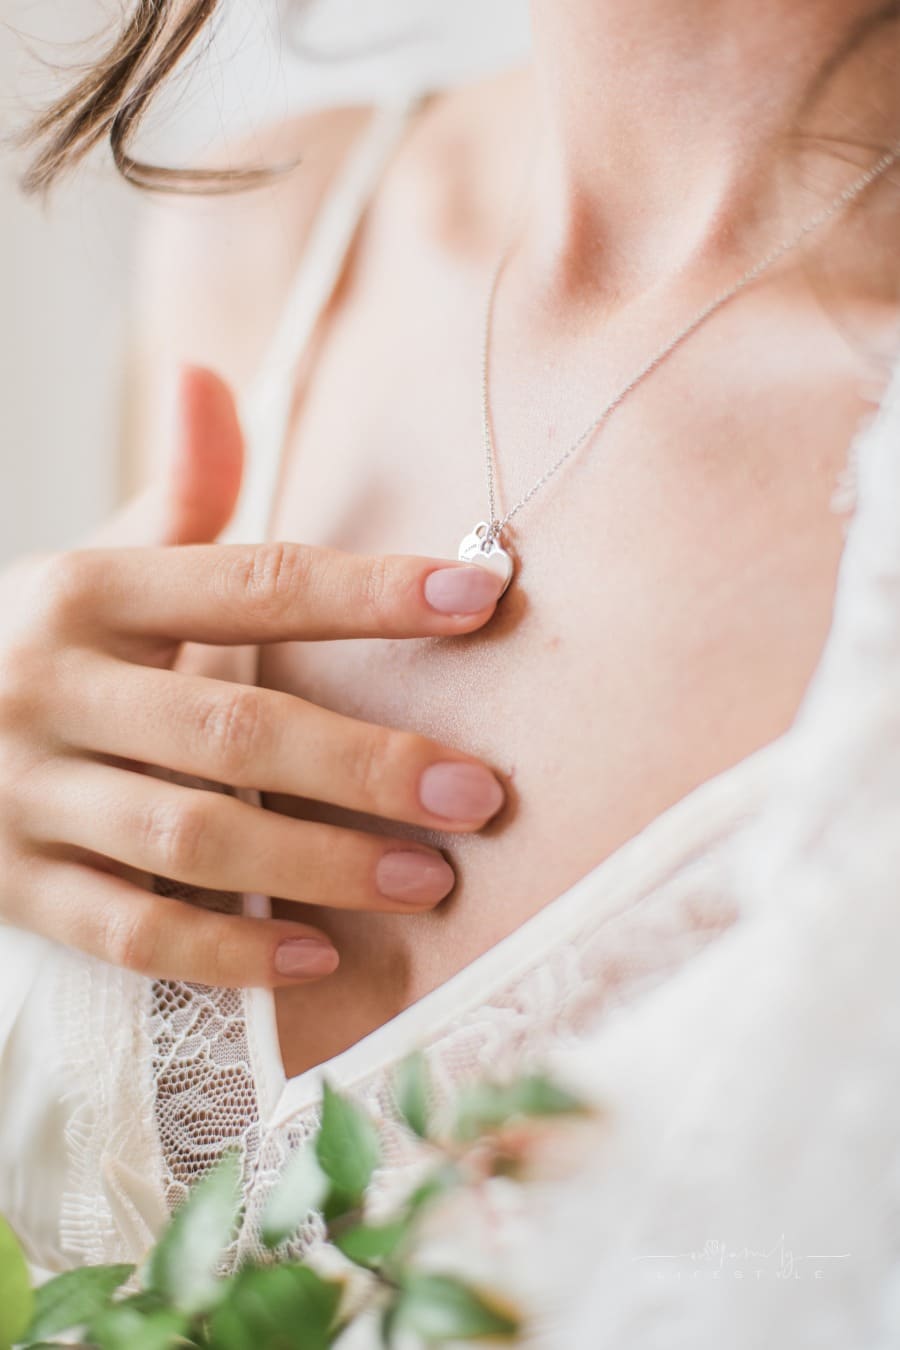 woman touching heart pendant necklace around her neck